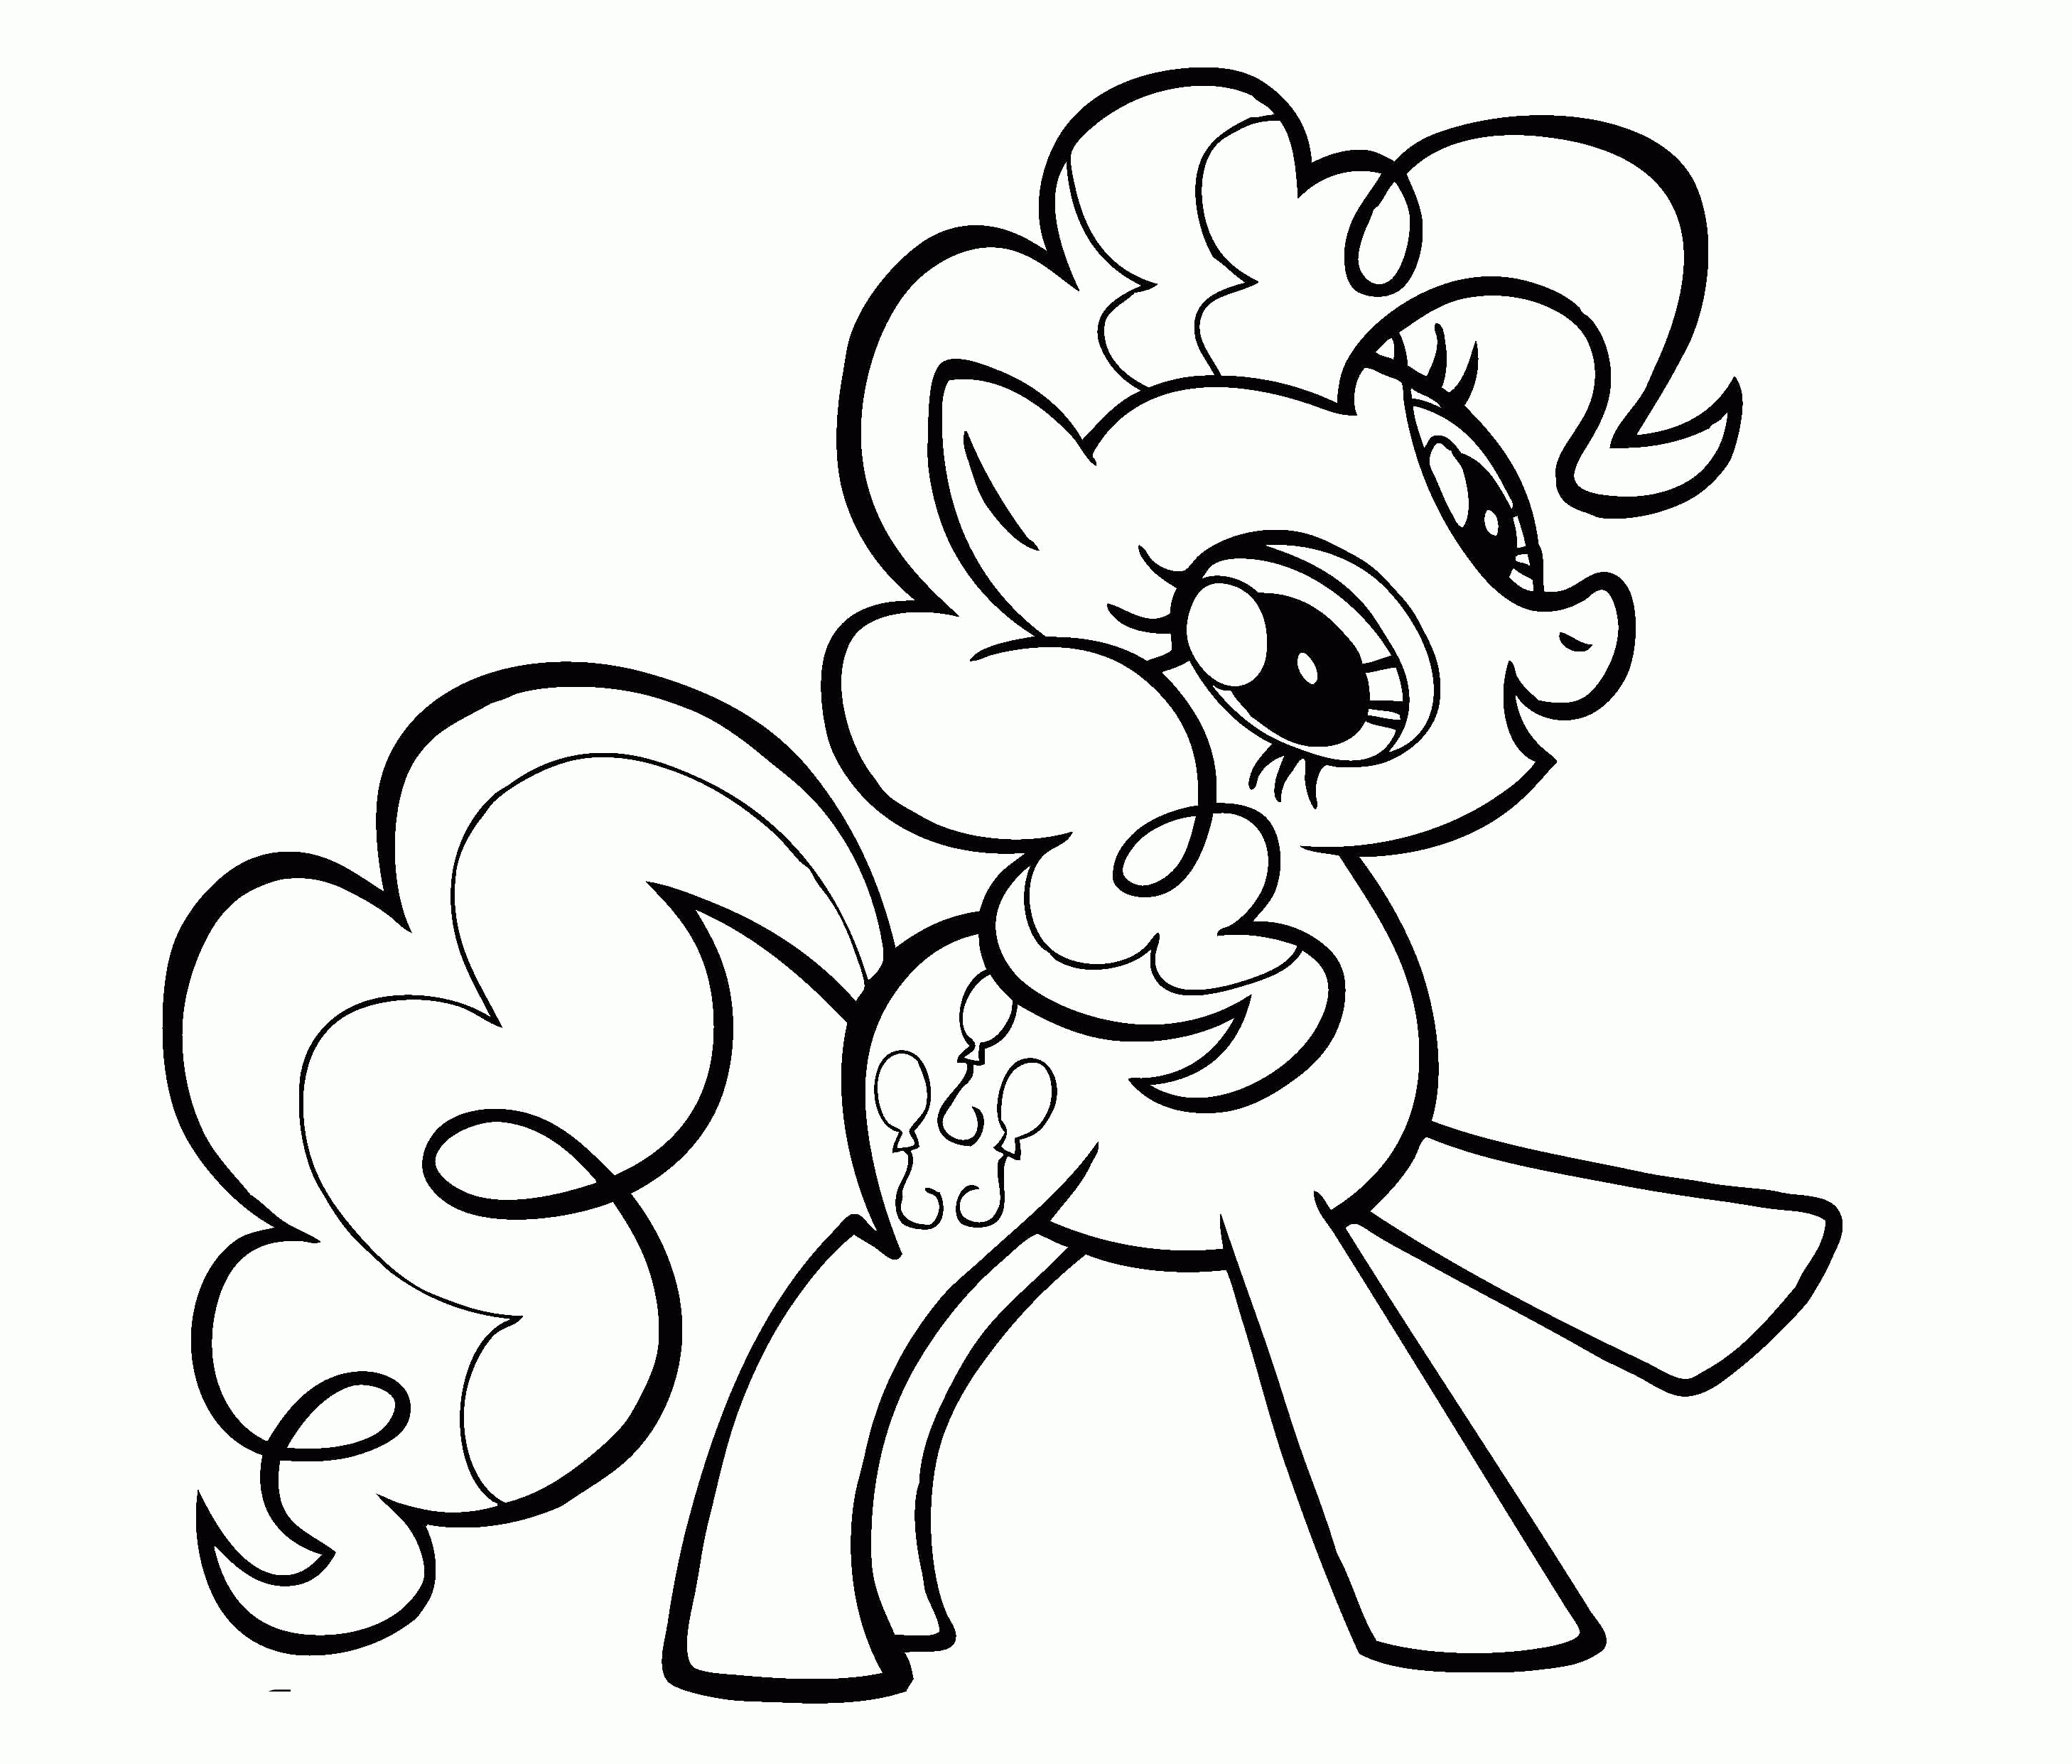 Pinkie Pie Coloring Page For Kids And For Adults   Coloring Home